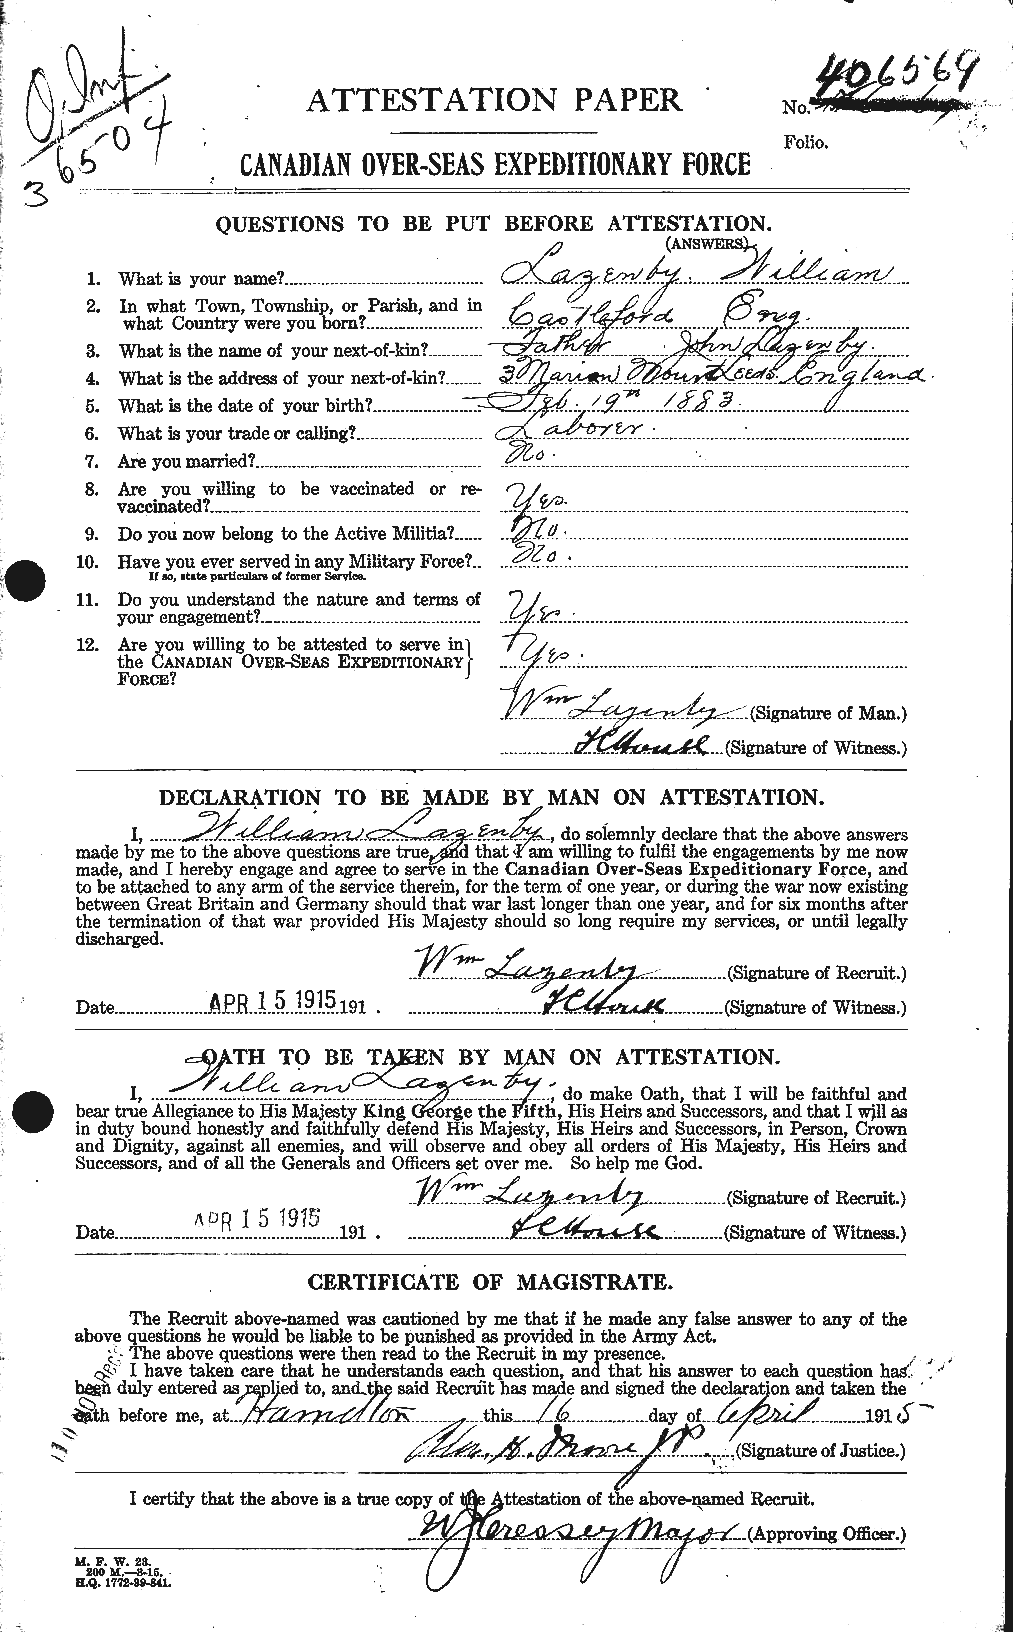 Personnel Records of the First World War - CEF 691602a